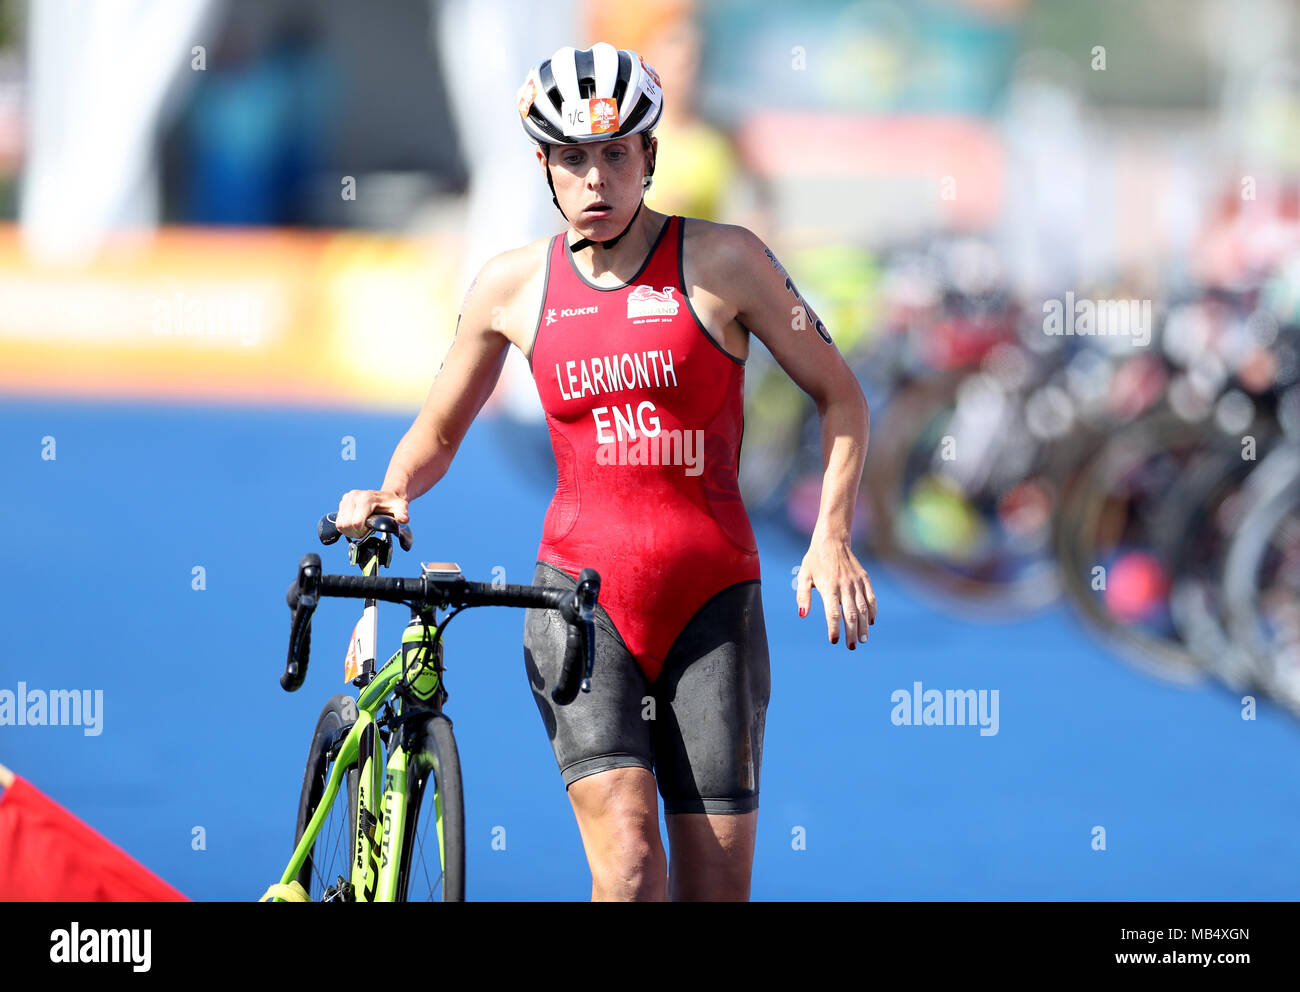 England's Jessica Learmonth during the Mixed Team Relay Triathlon final at the Southport Broadwater Parklands during day three of the 2018 Commonwealth Games in the Gold Coast, Australia. Stock Photo